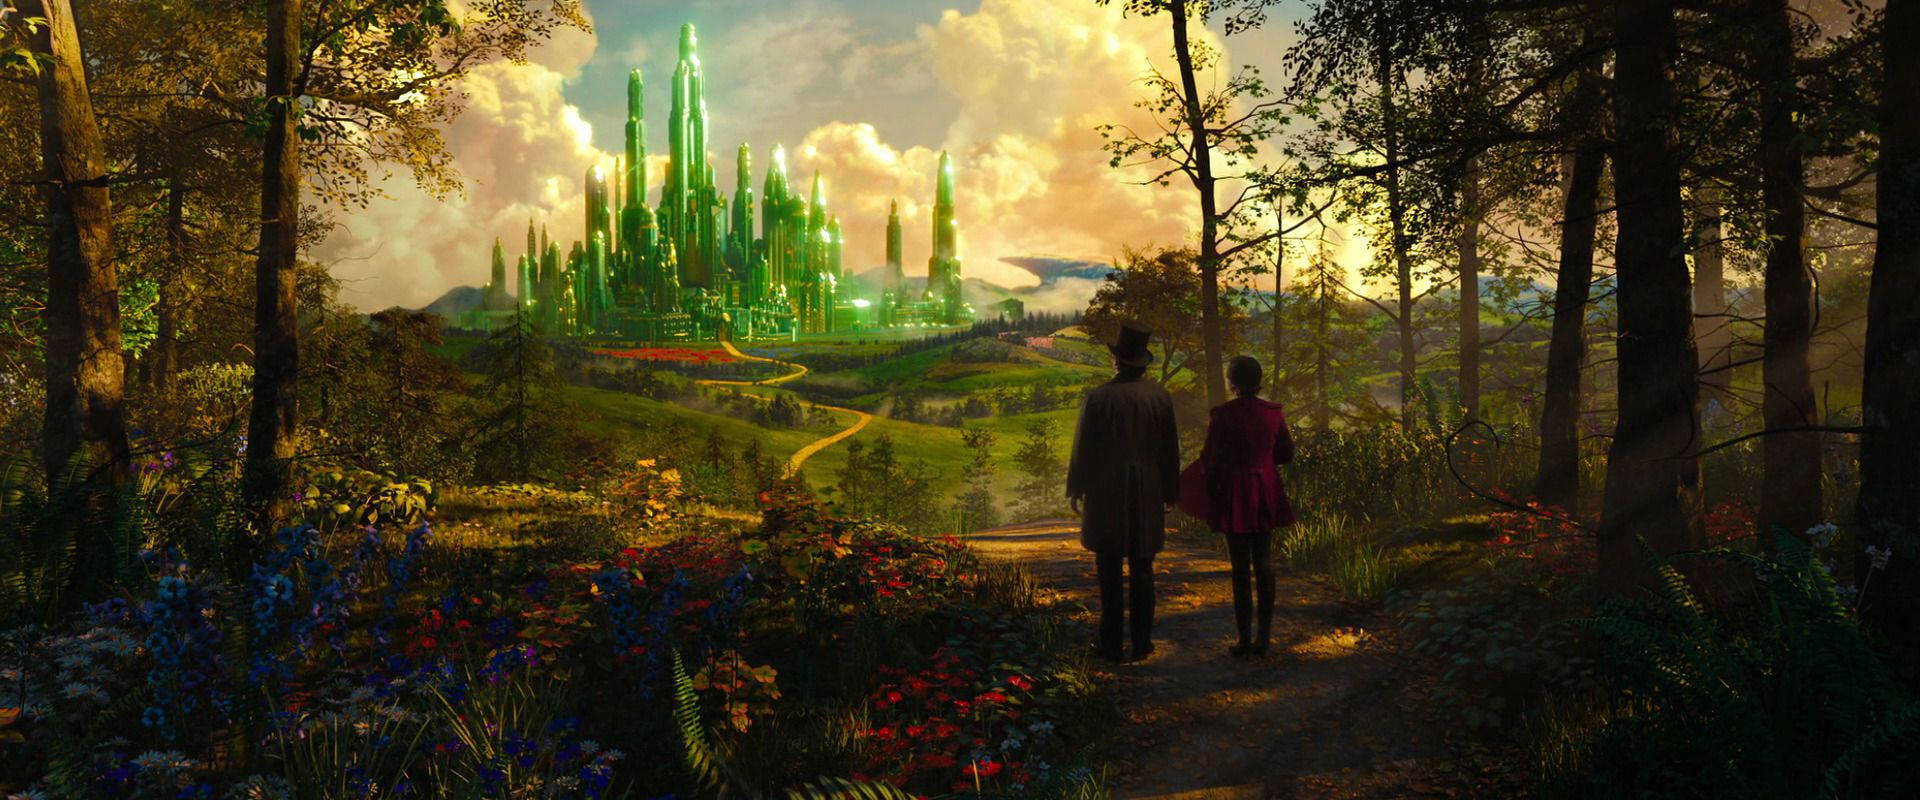 Oz The Great And Powerful 2013 Film